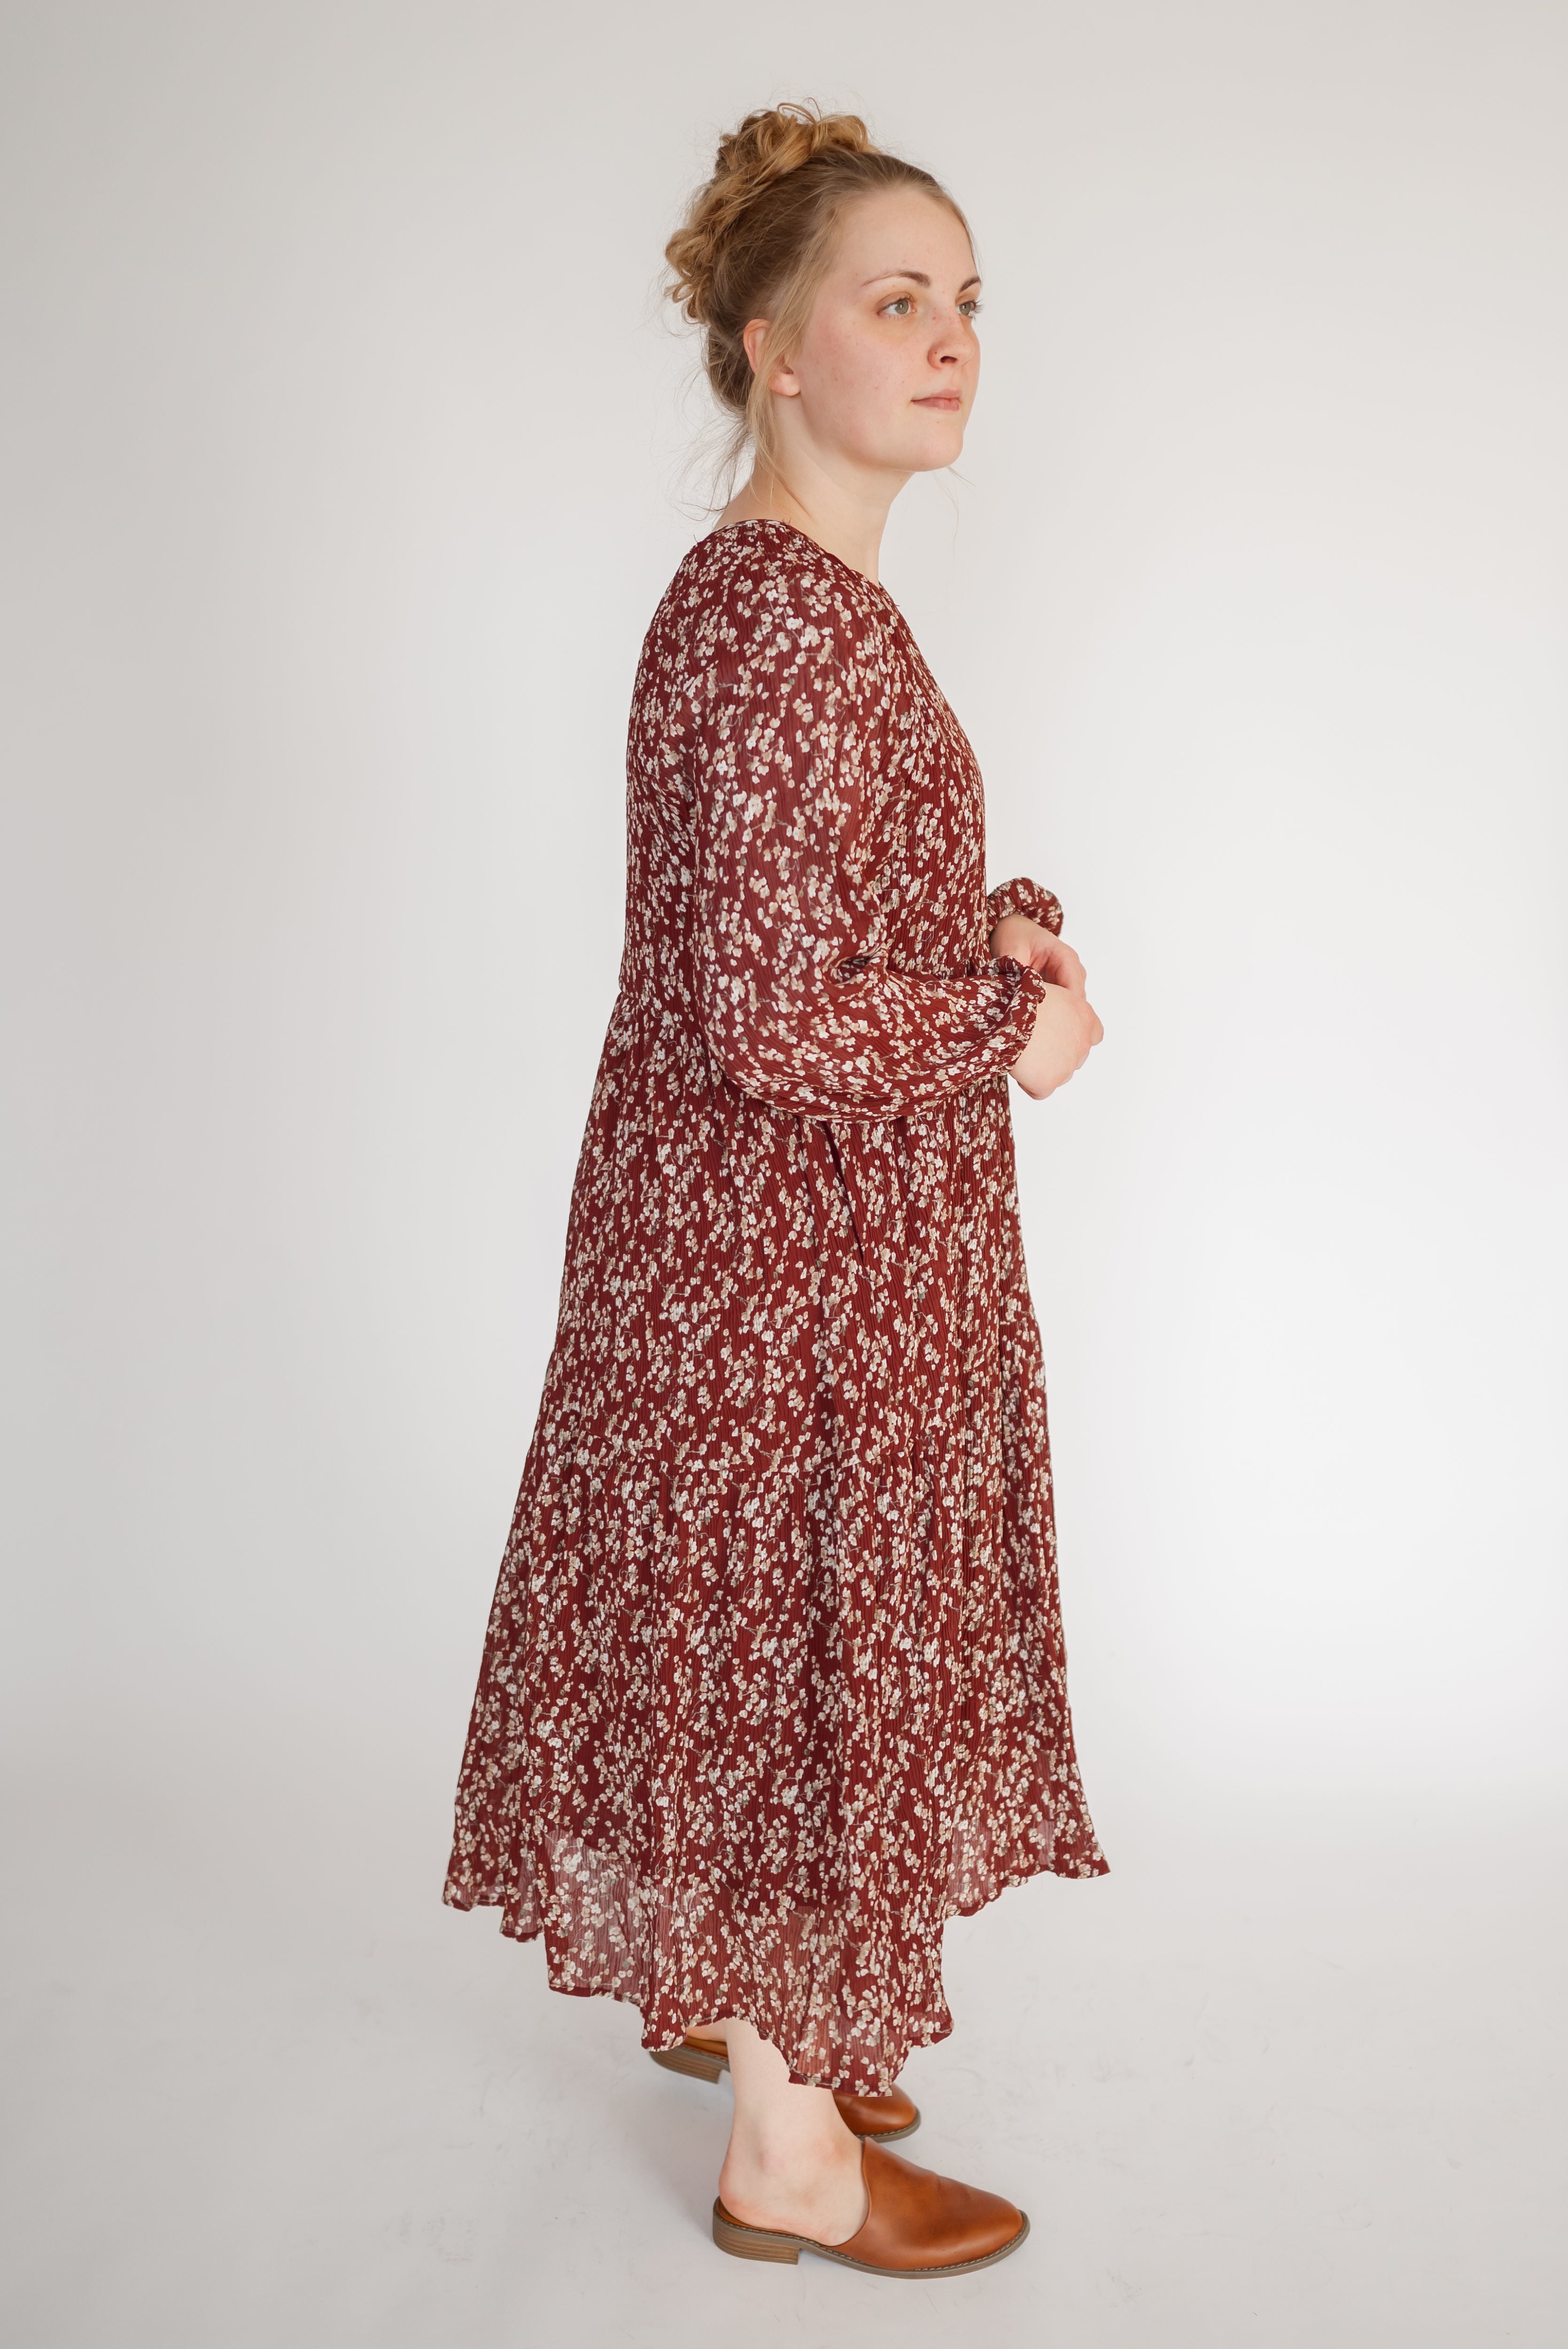 Everleigh Floral Tiered Midi Dress in Burgundy